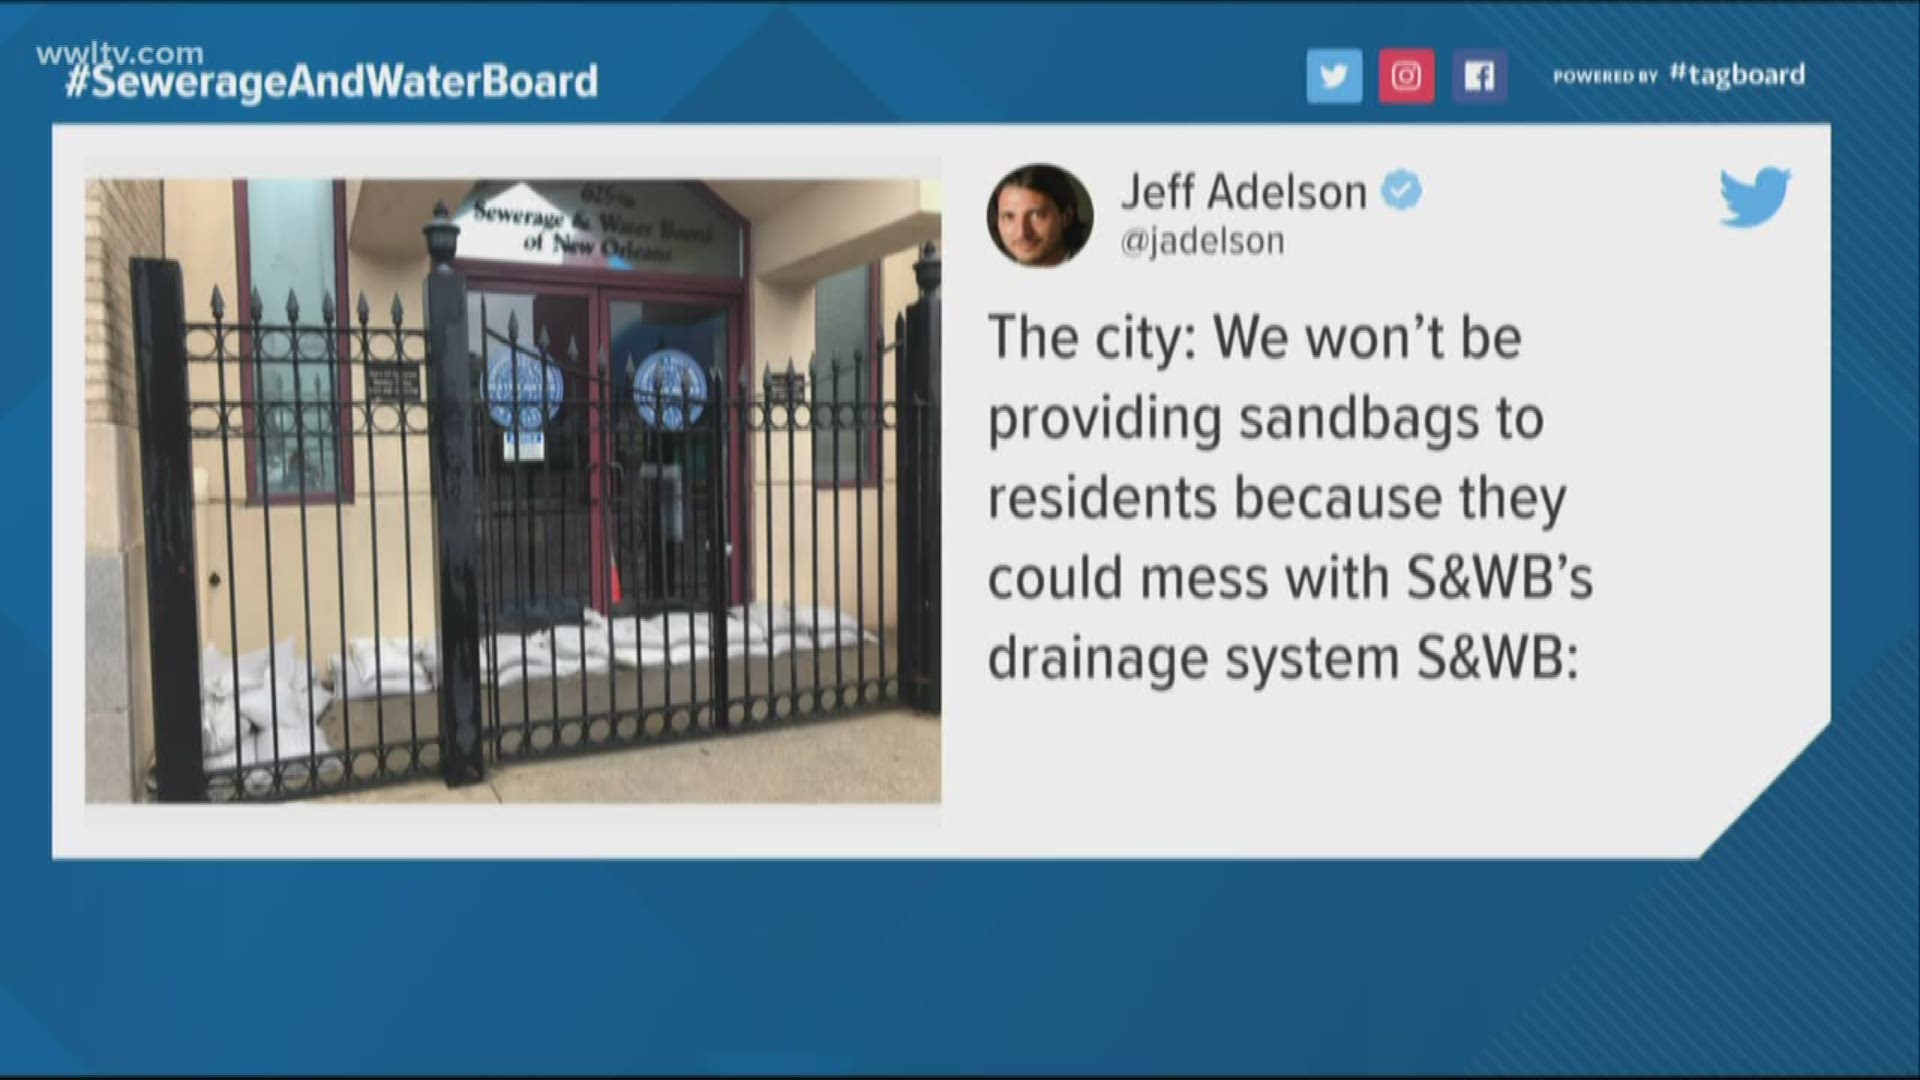 A Tweet from The Times Picayune | The New Orleans Advocate went viral when it showed sandbags protecting the S&WB offices.